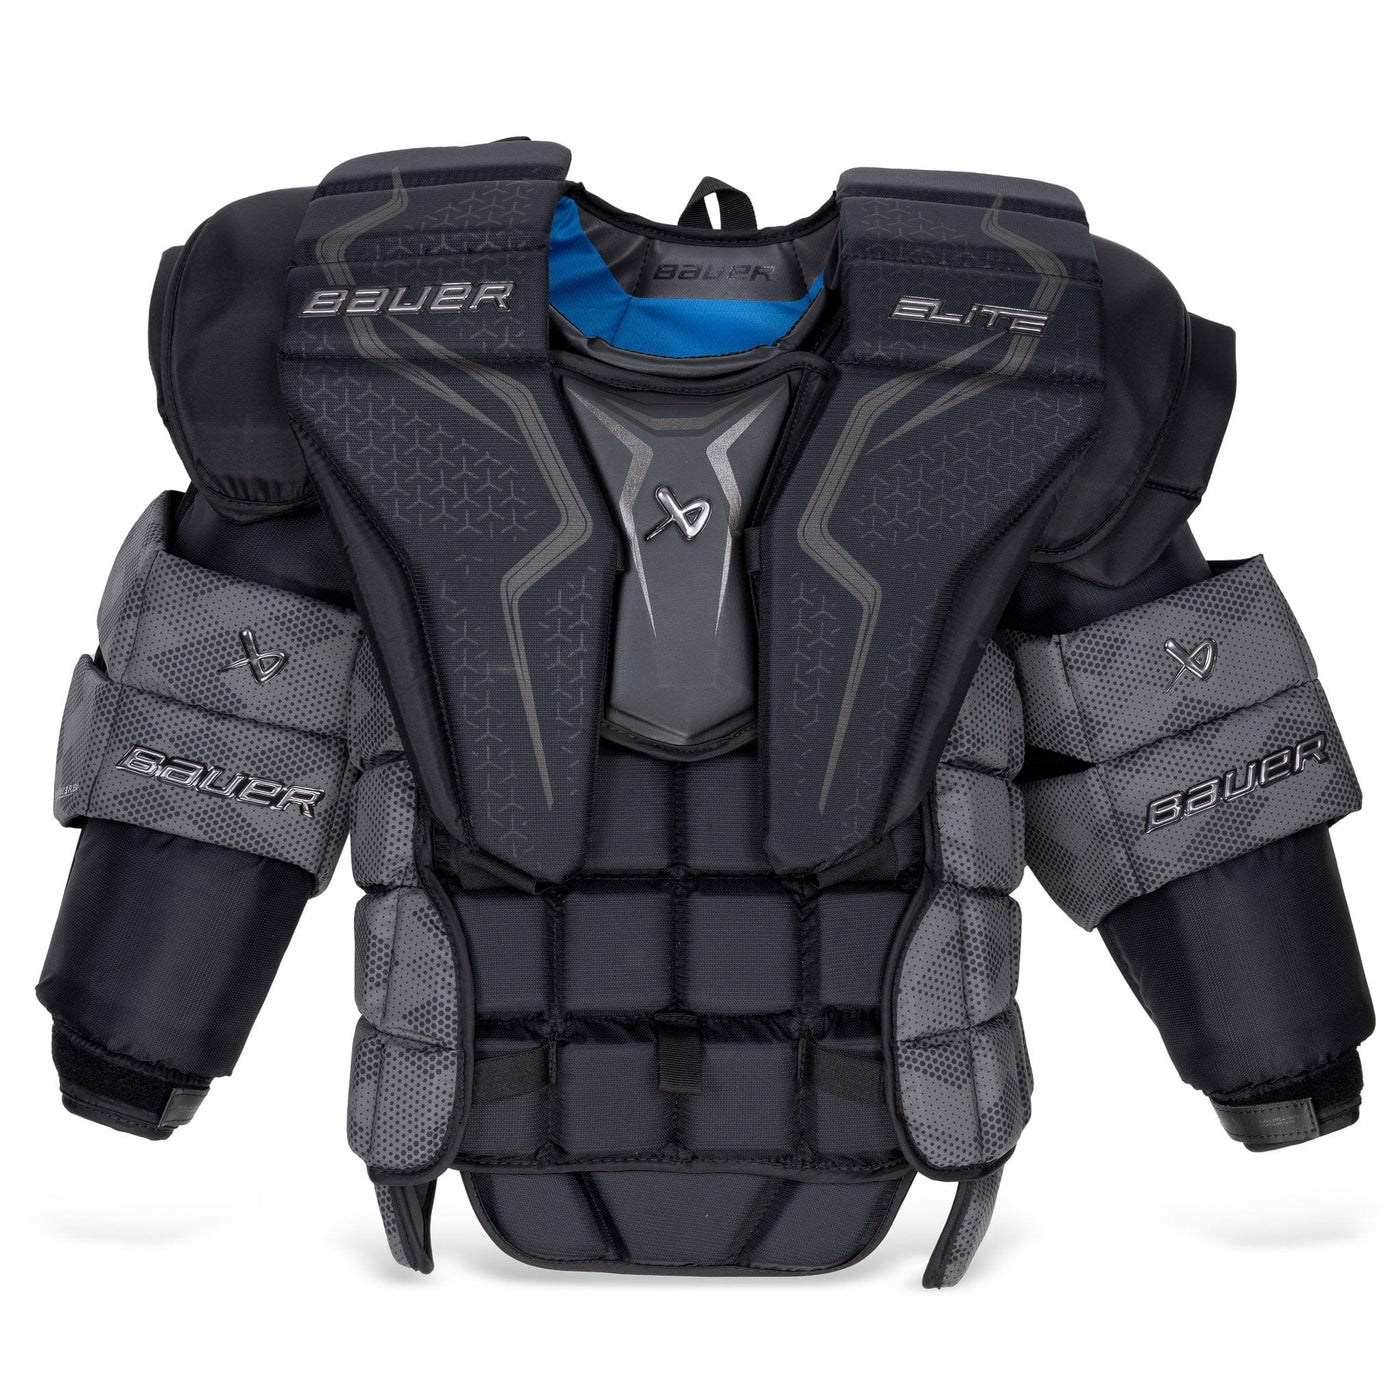 Bauer Elite Senior Chest & Arm Protector S23 - The Hockey Shop Source For Sports